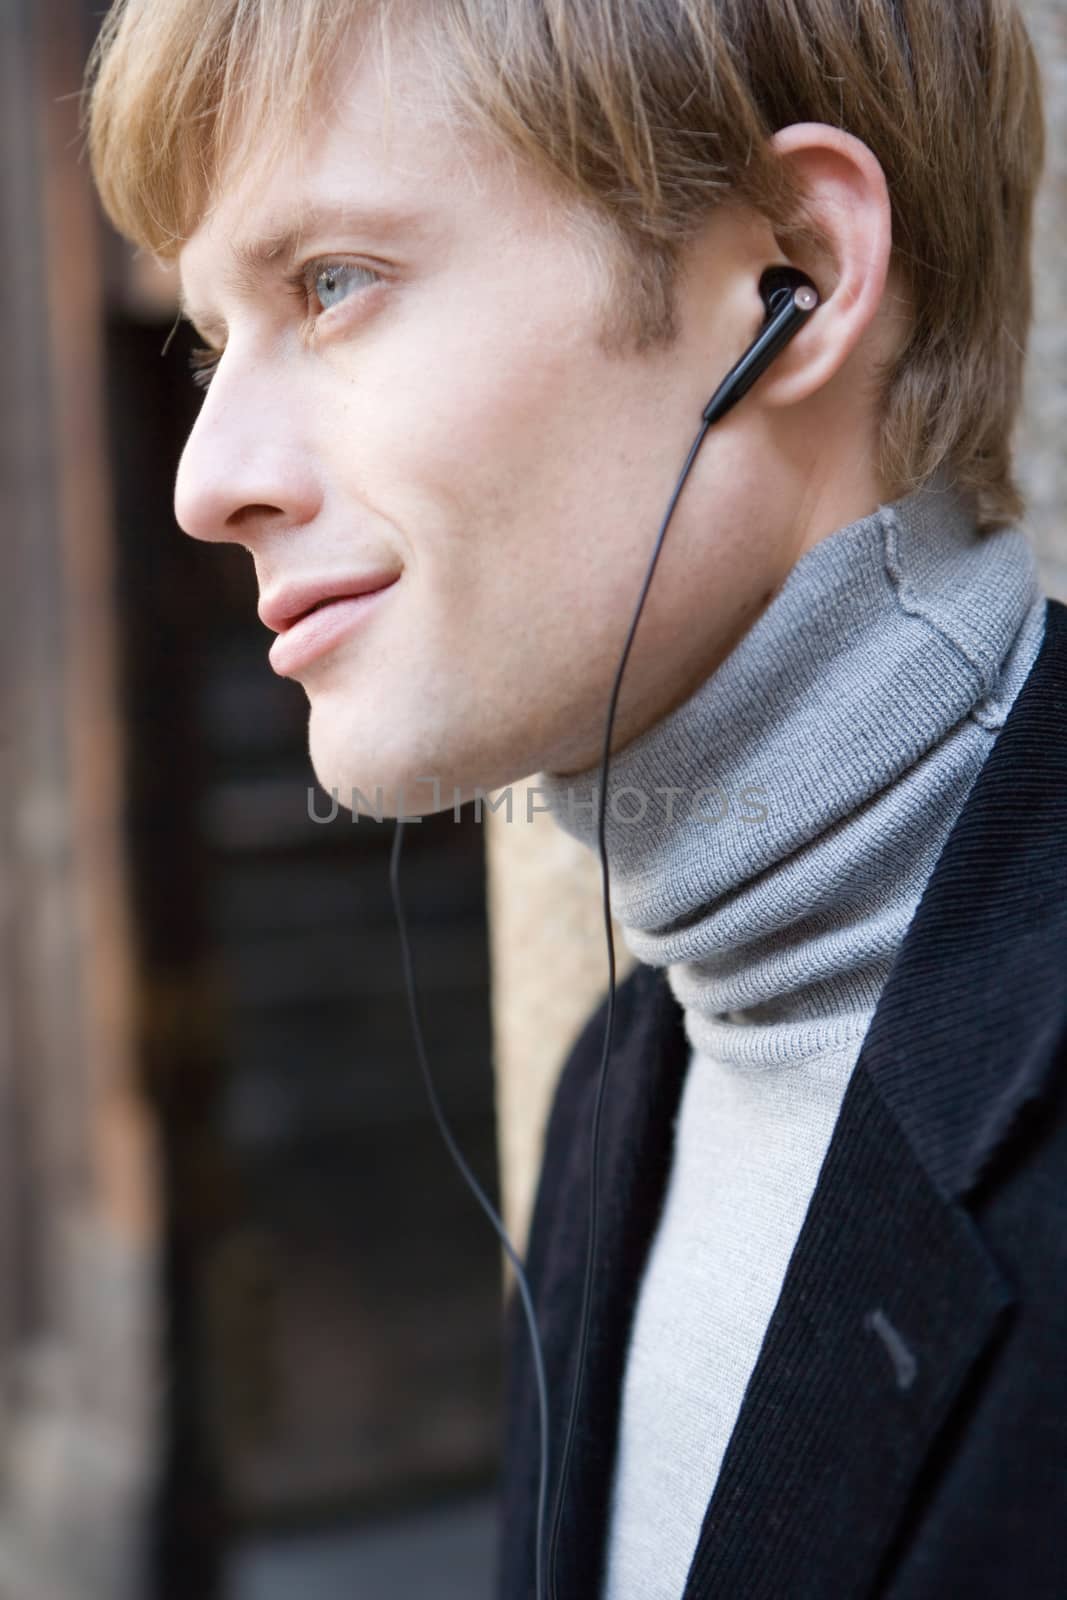 man listens to music by toocan